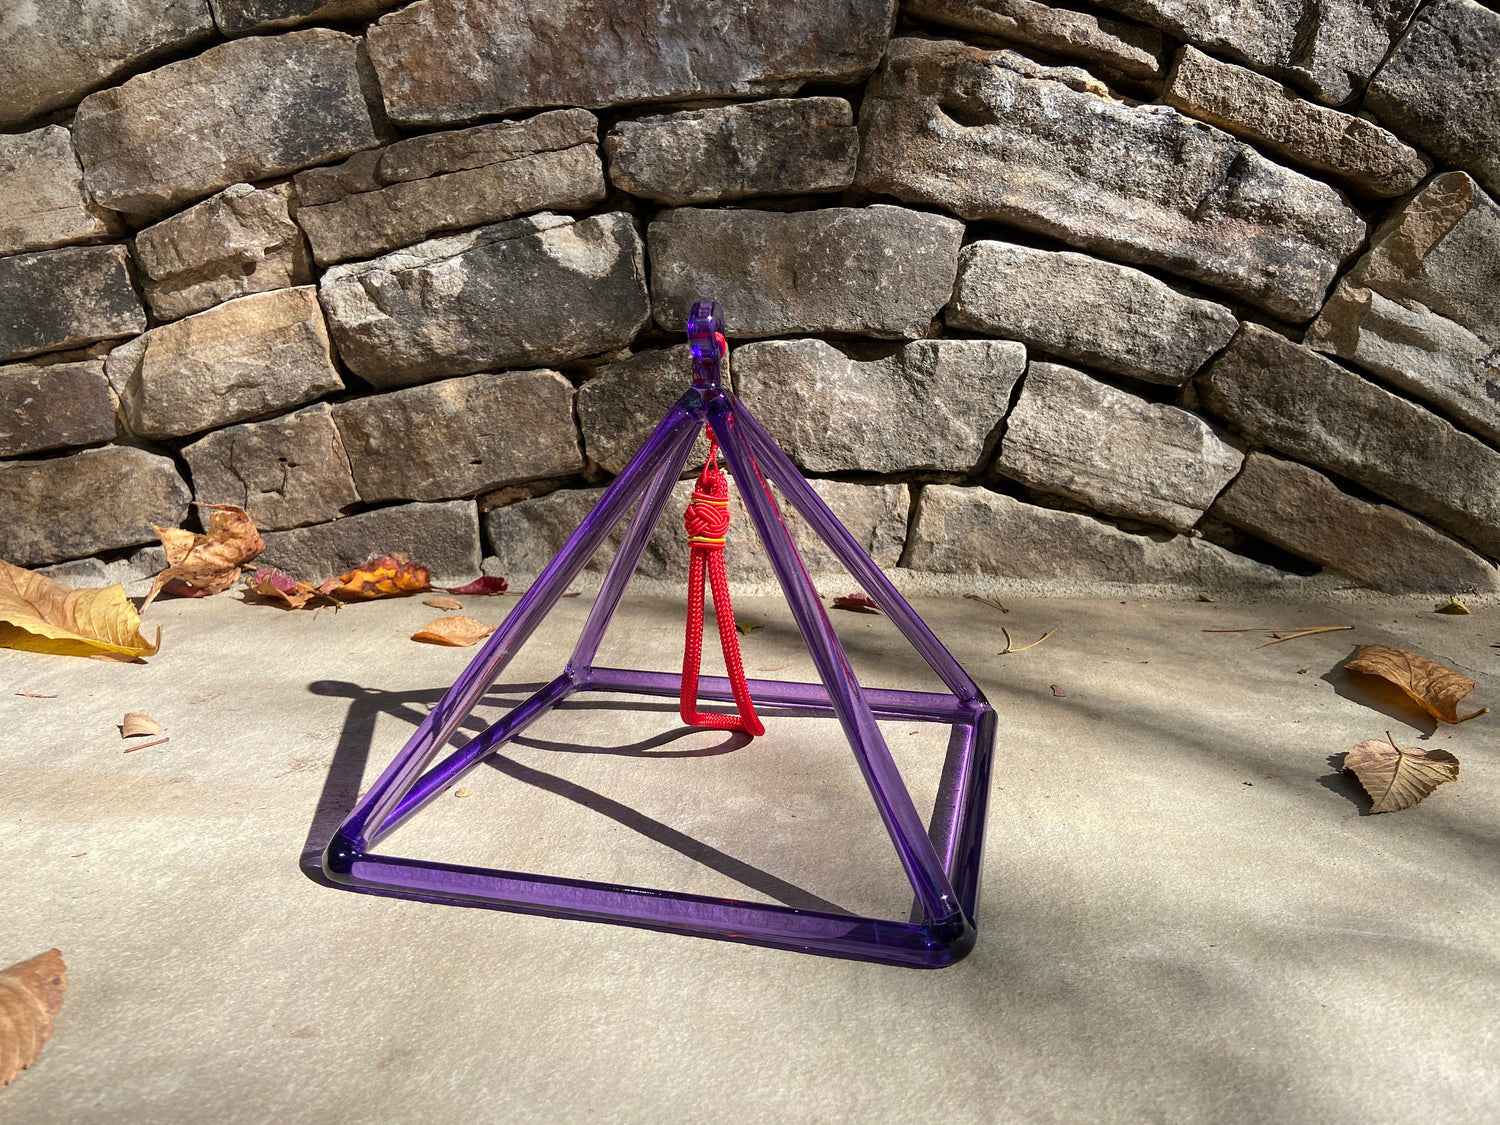 8" Purple Quartz Crystal Singing Pyramid - Sound Vibration - Musical Instrument With Crystal Striker And Padded Carry Case